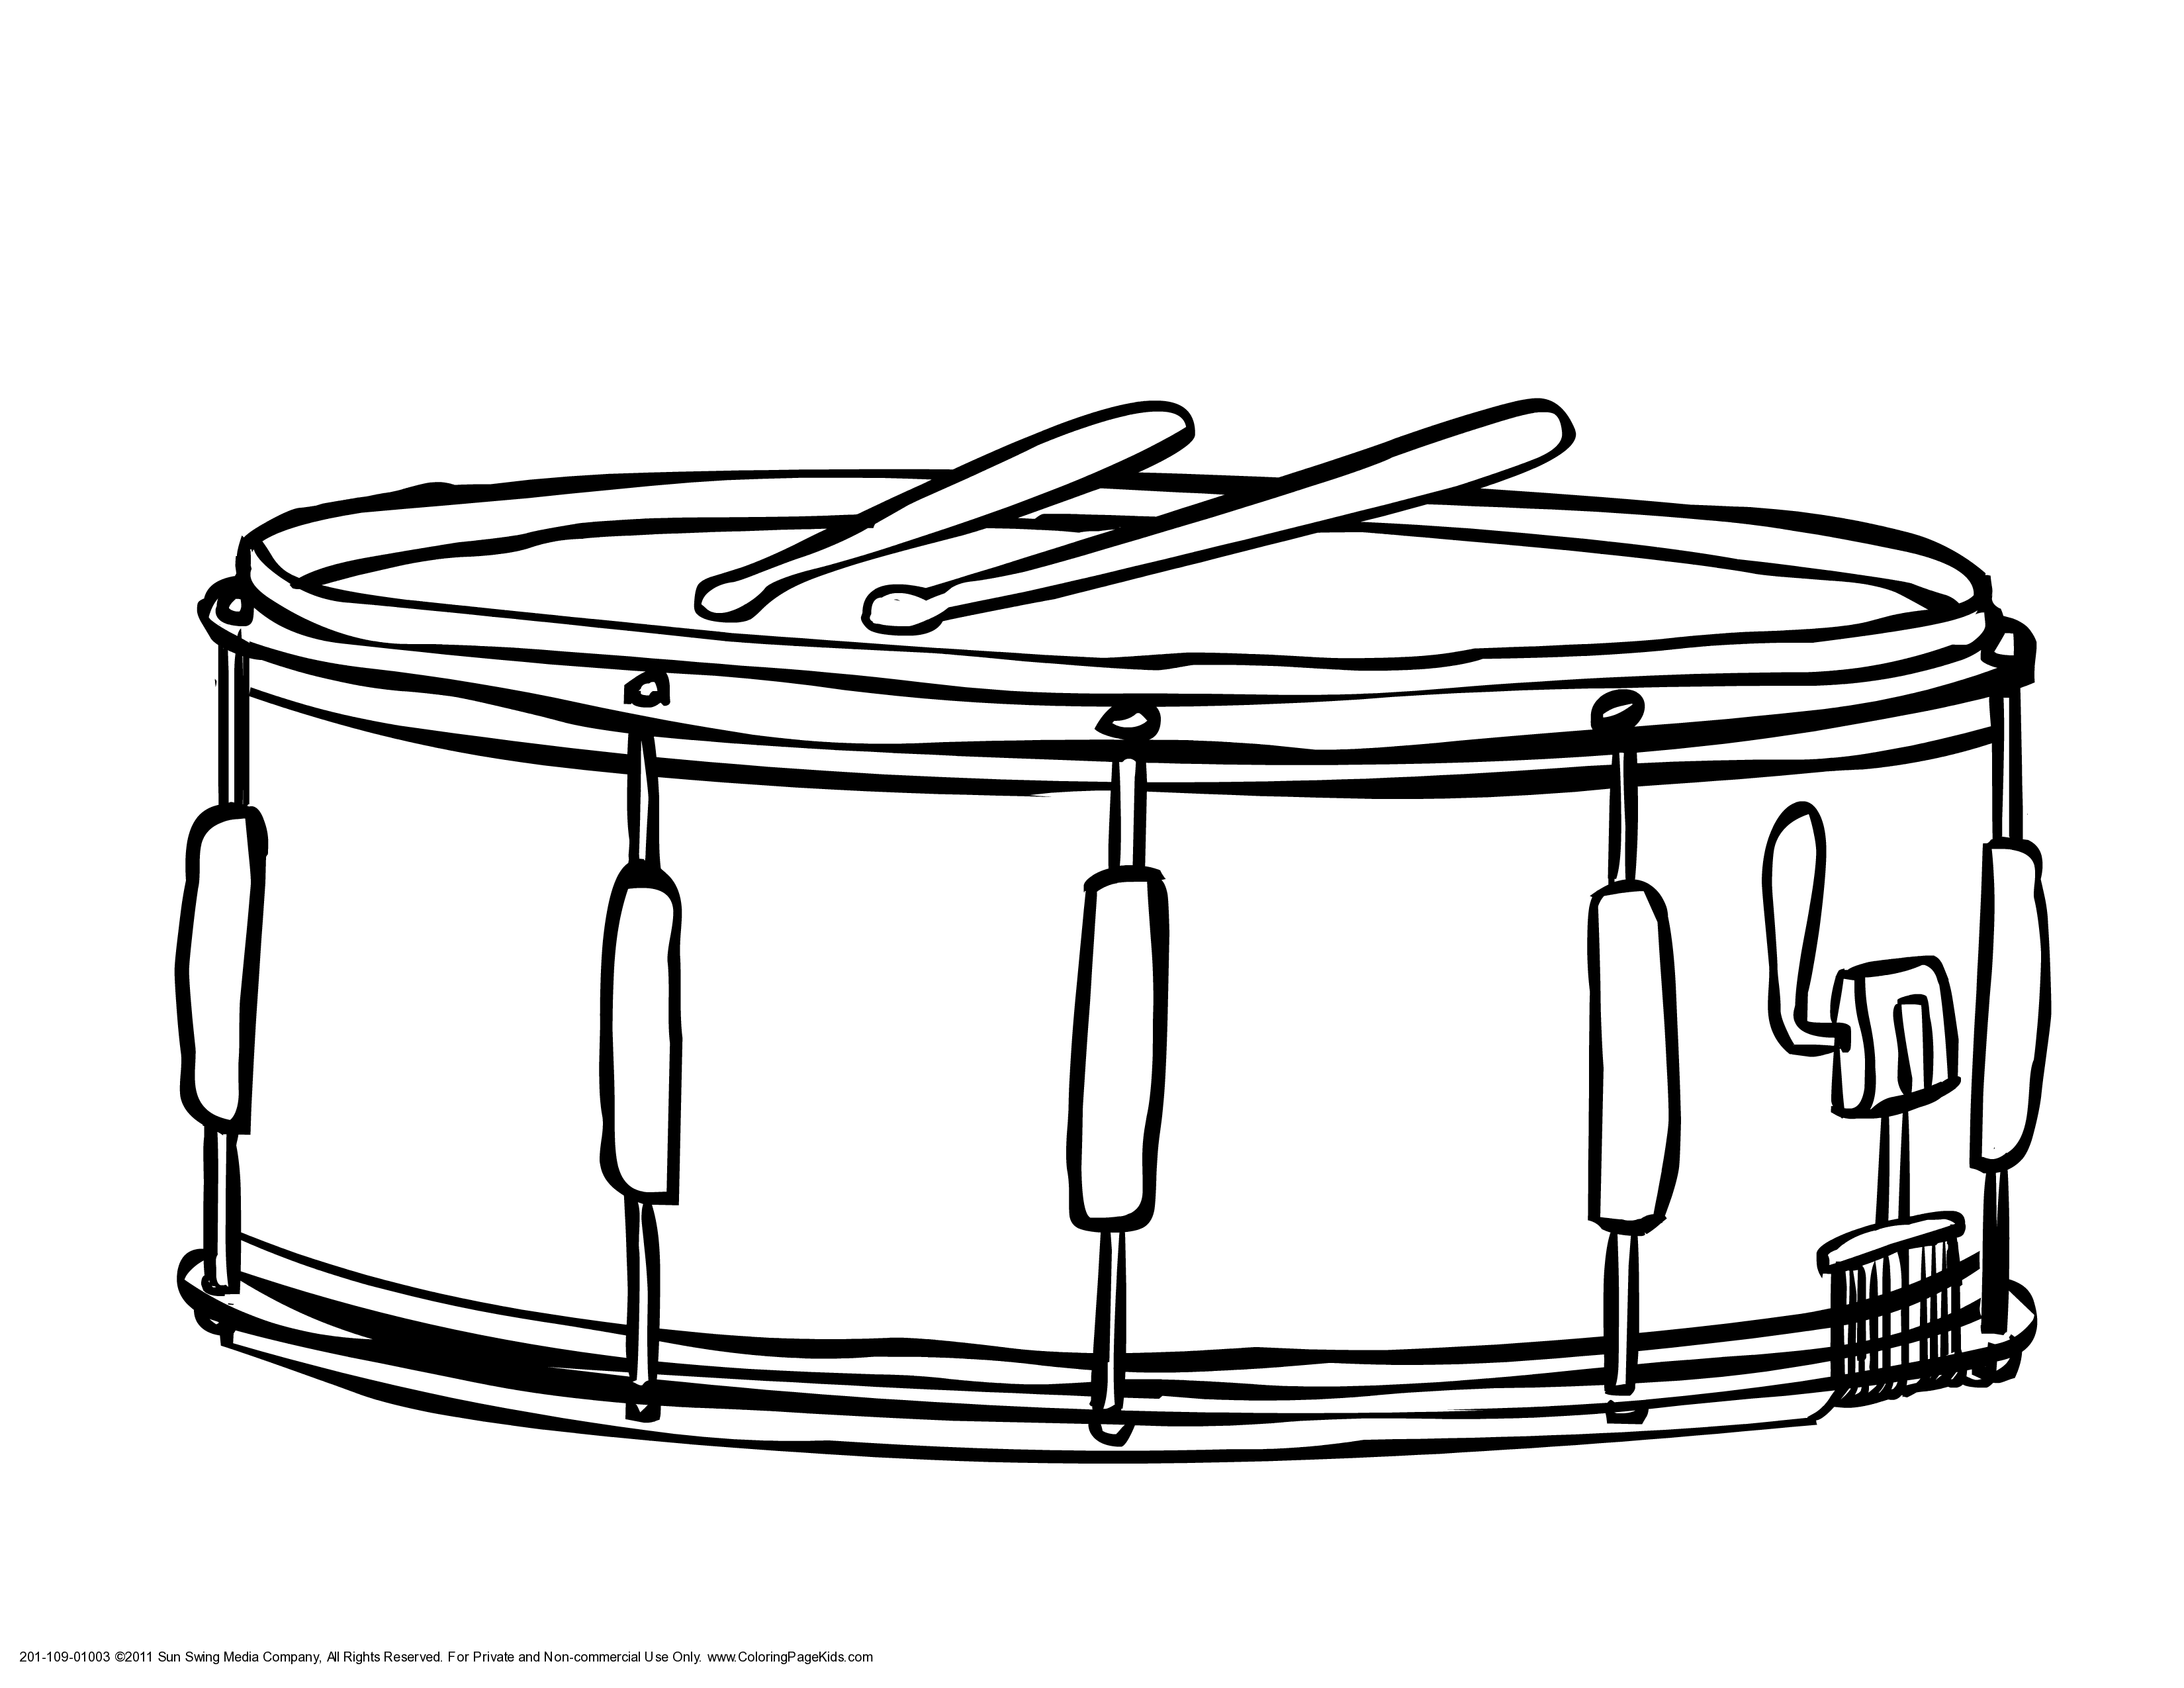 Snare Drum clipart and illust